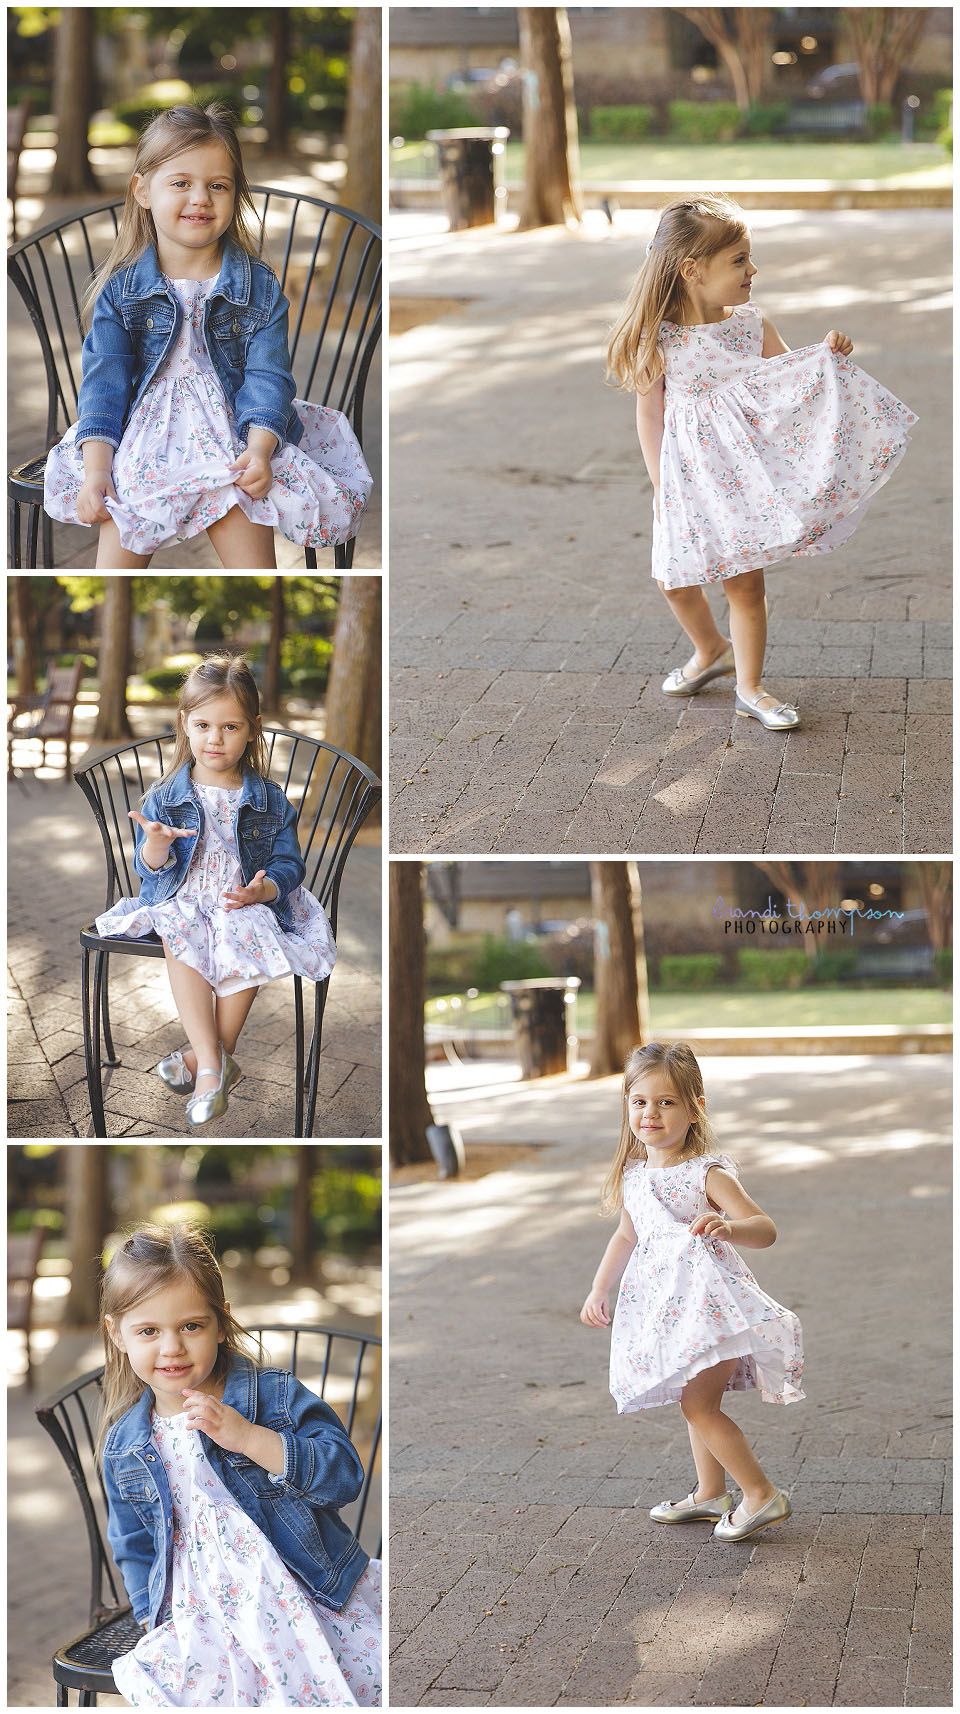 A three year old white girl with dark blond hair, in a collage of photos outdoors